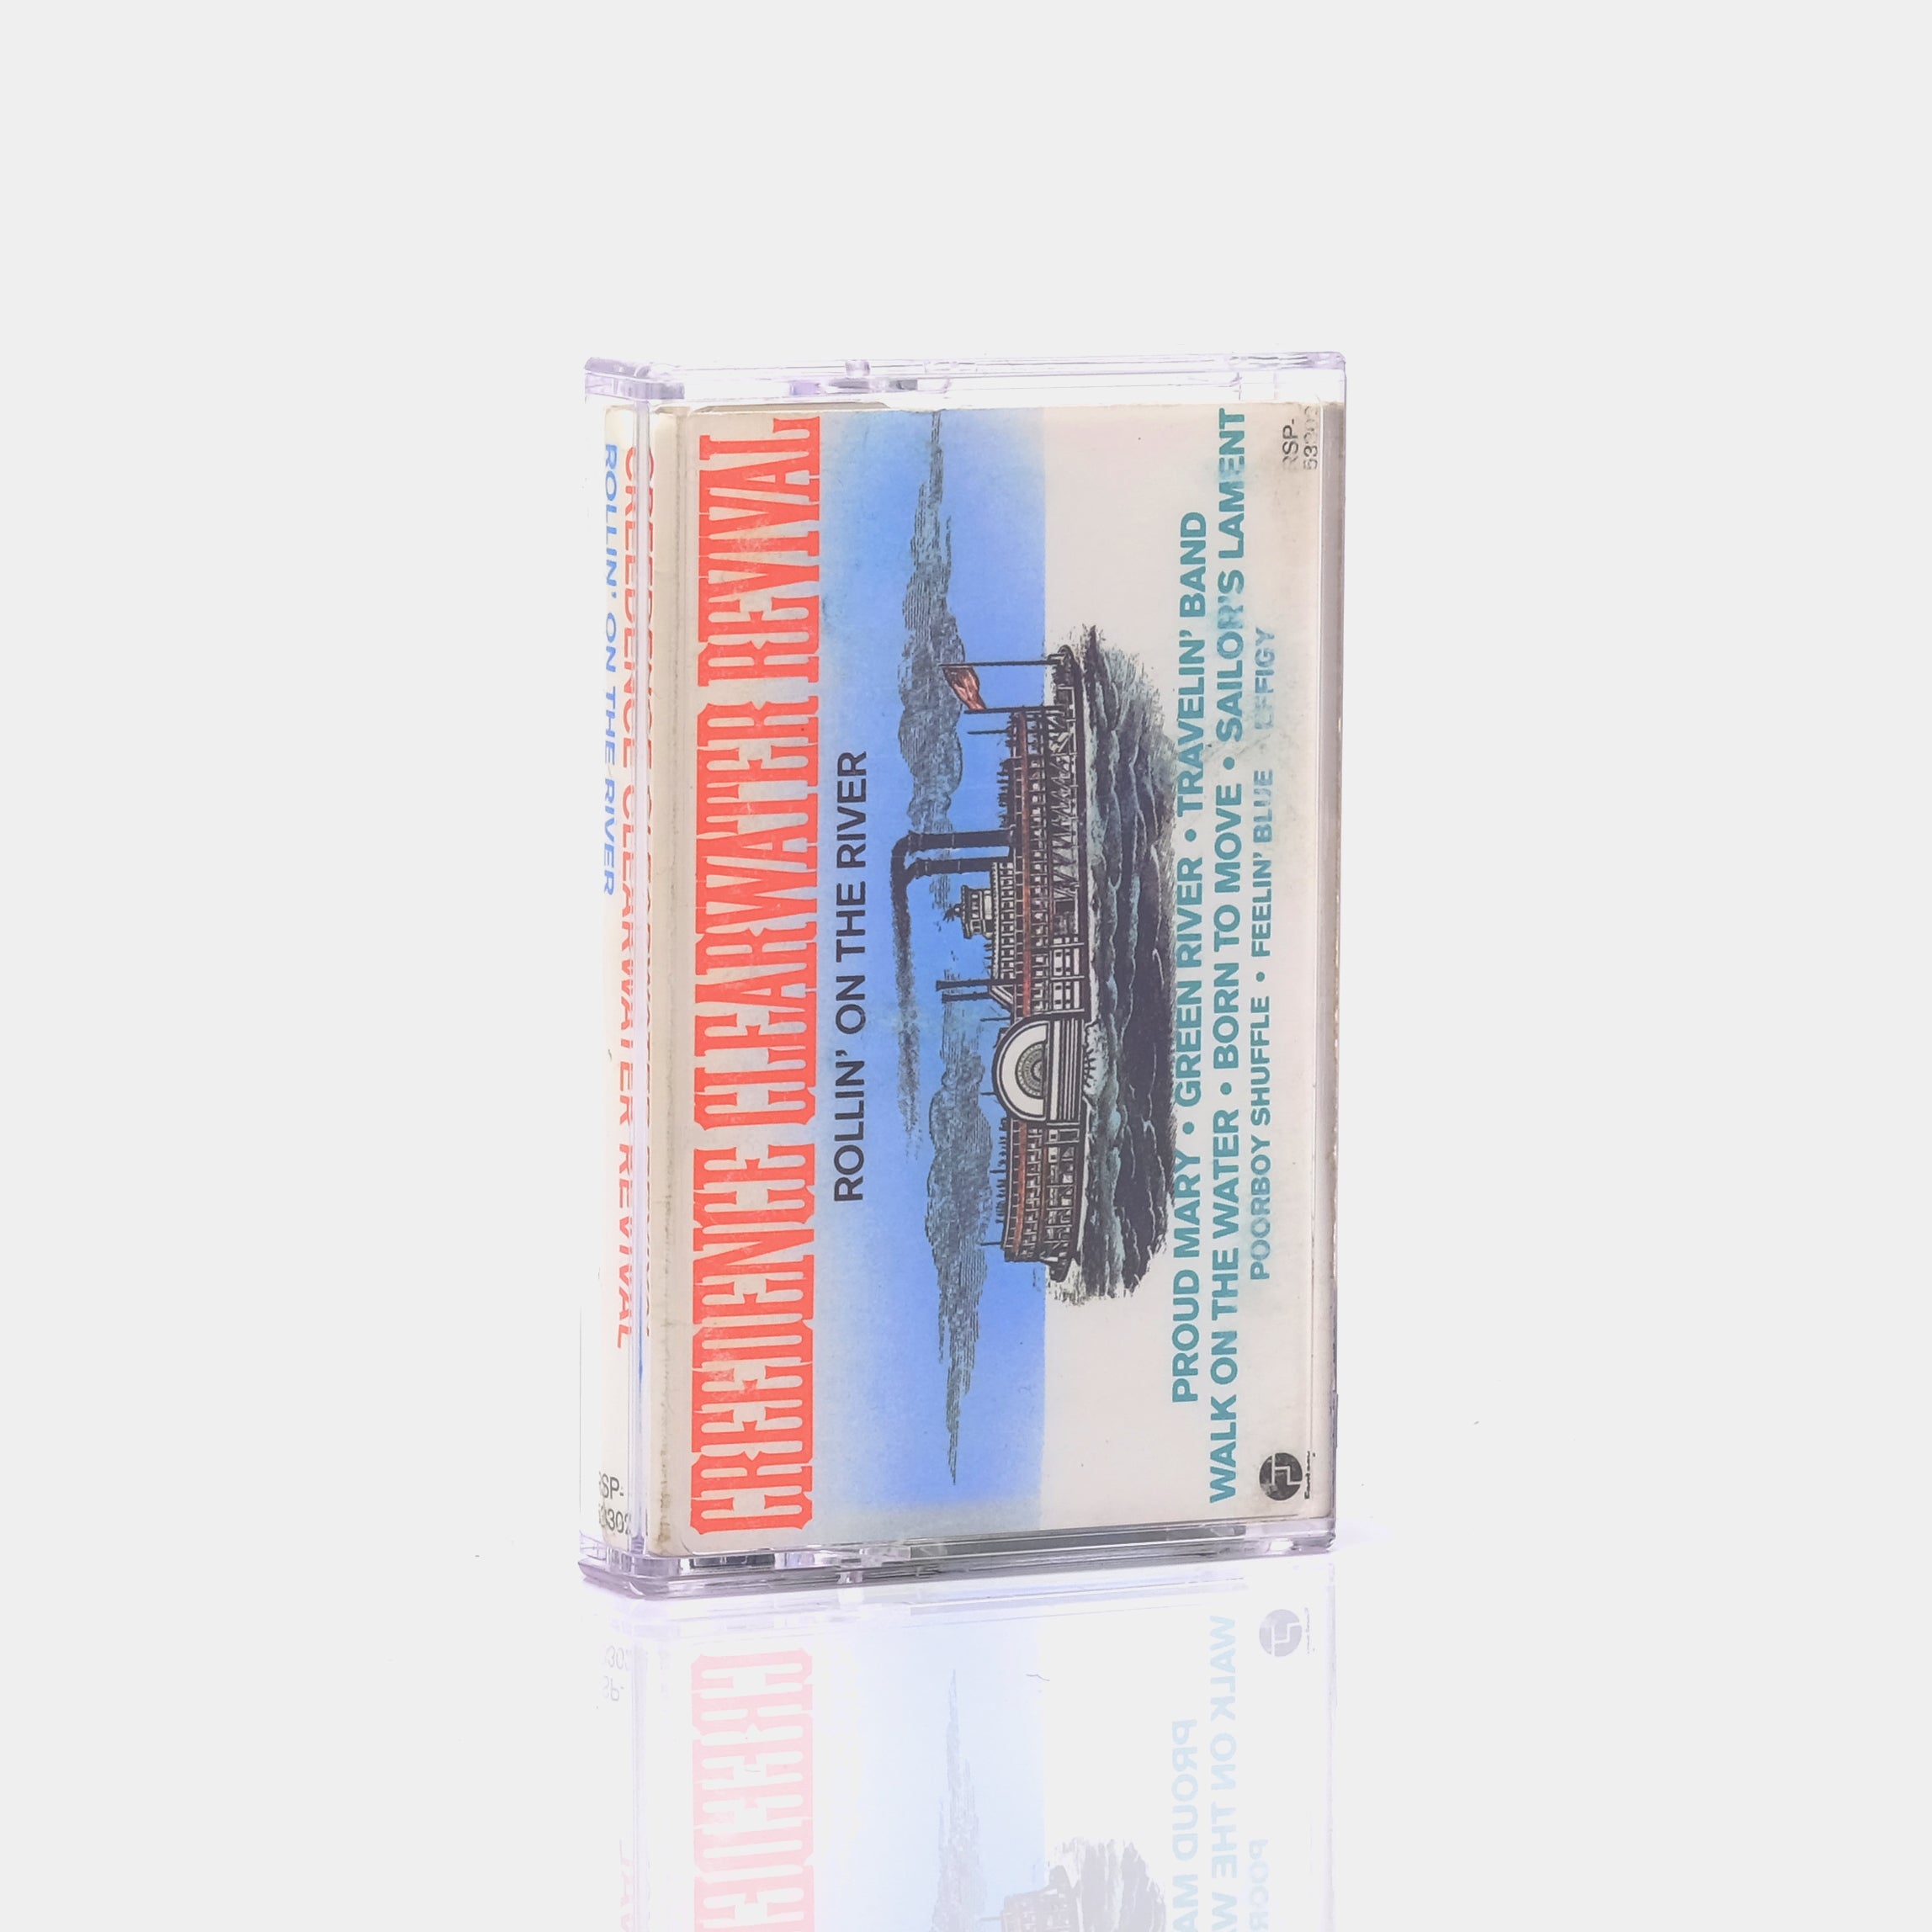 Creedence Clearwater Revival - Rollin' On The River Cassette Tape